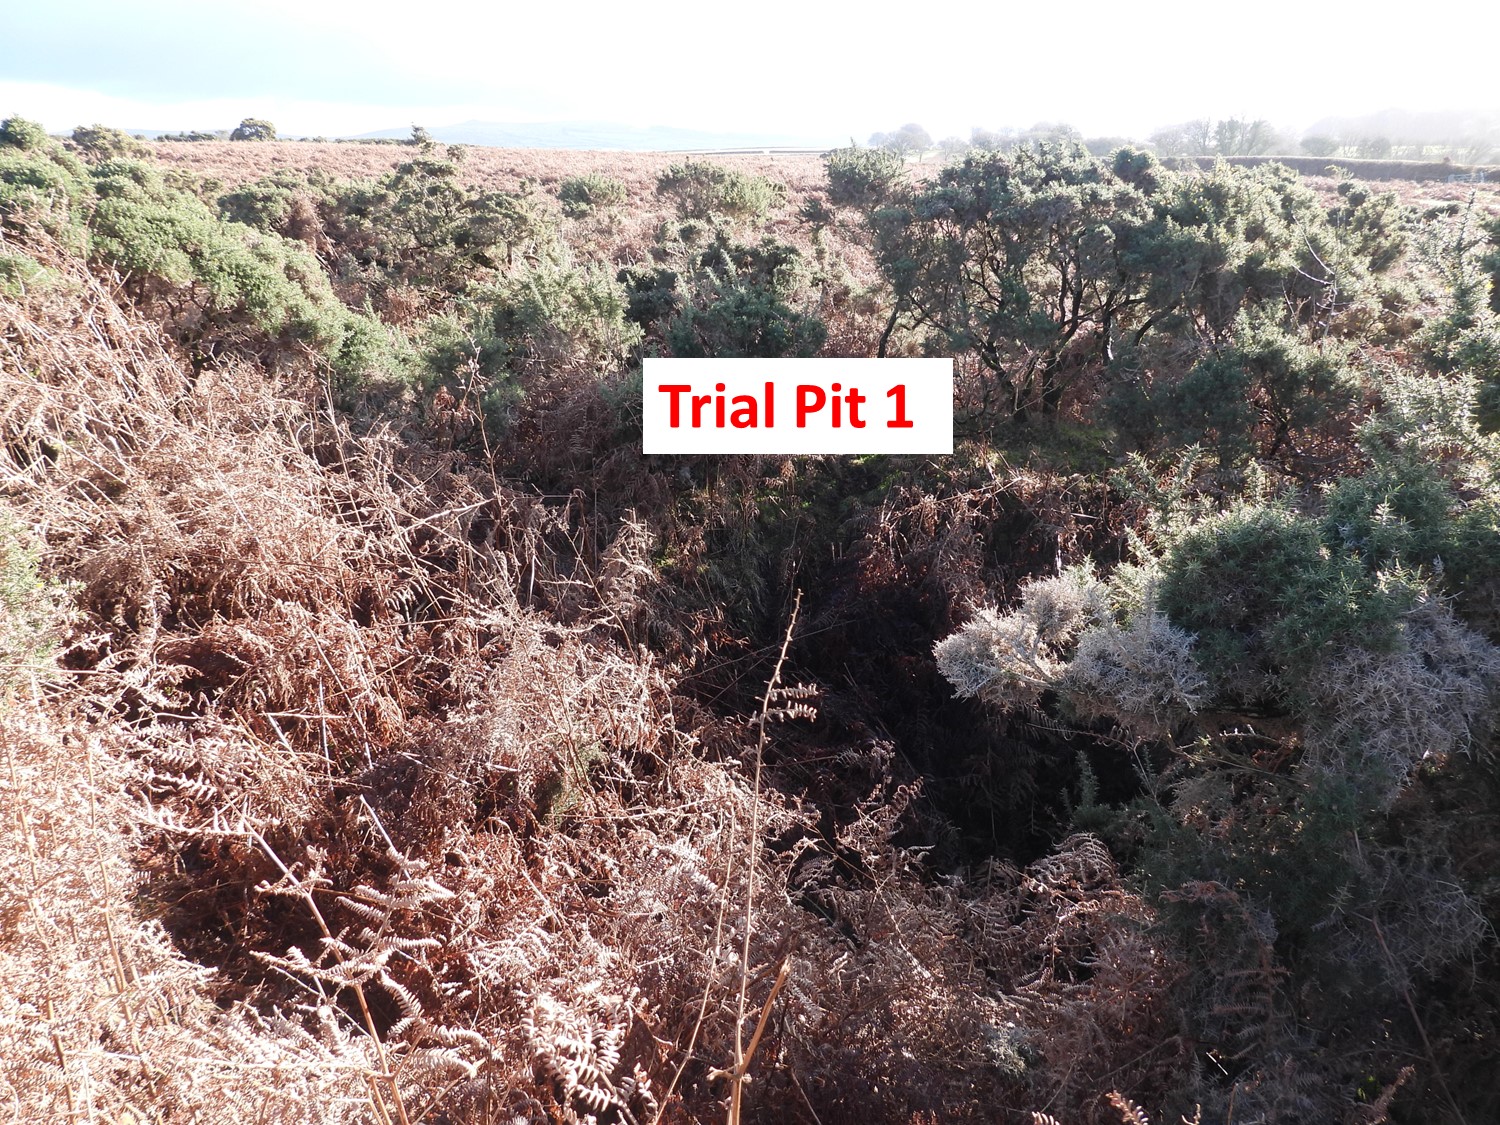 8. Trial Pit 1